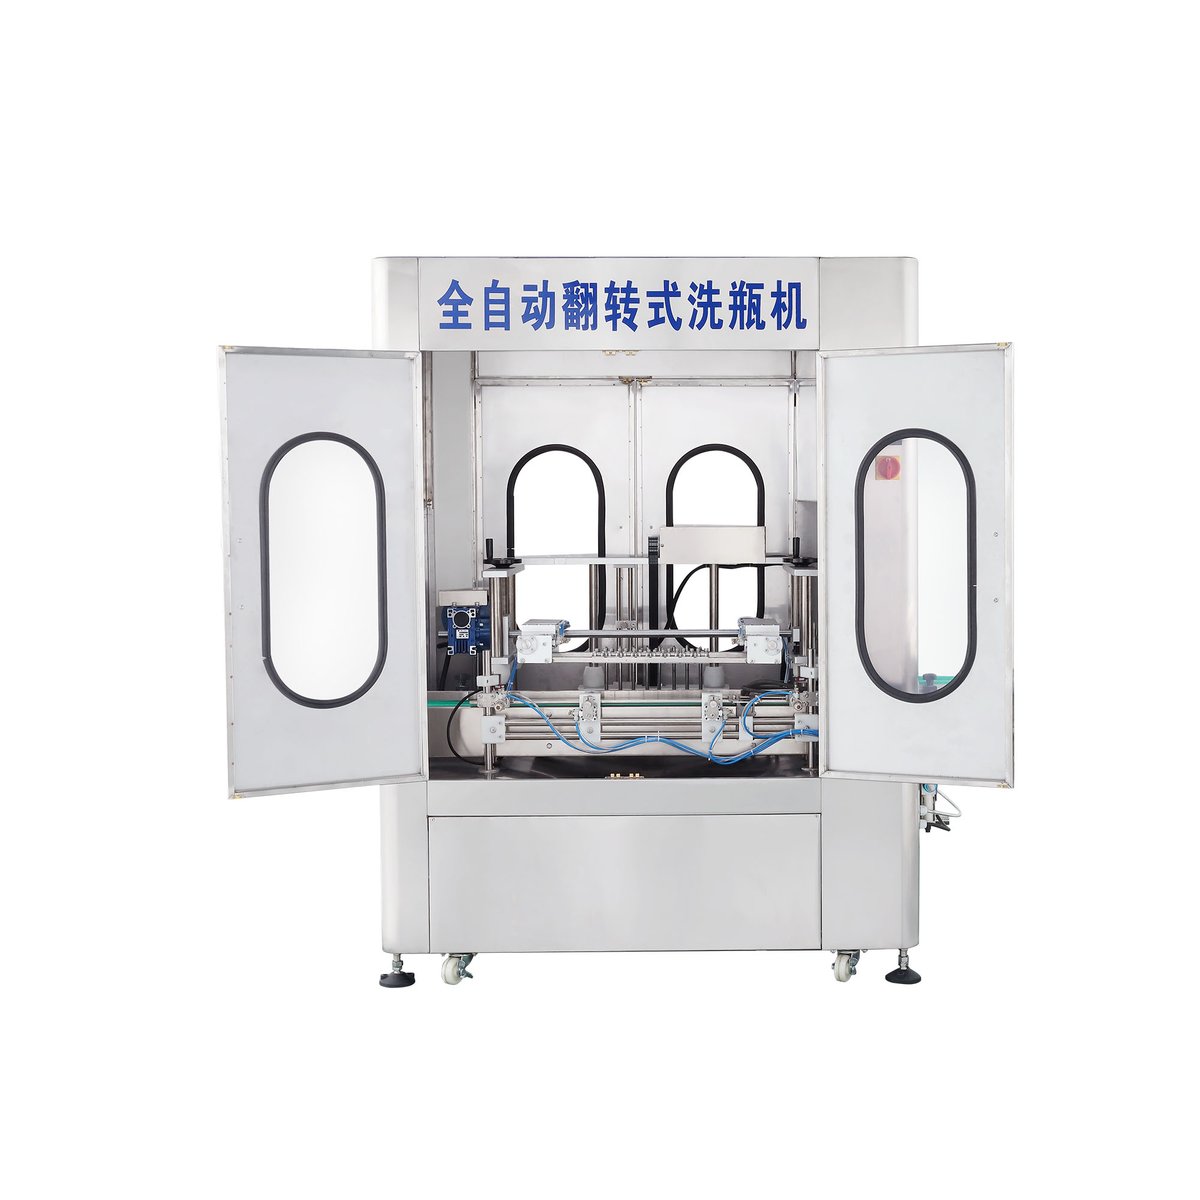 Are you the one who has been looking for this exceptional Automatic Flip Type bottle washer? tzpackaging.com/automatic-flip… #bottlewashingmachine